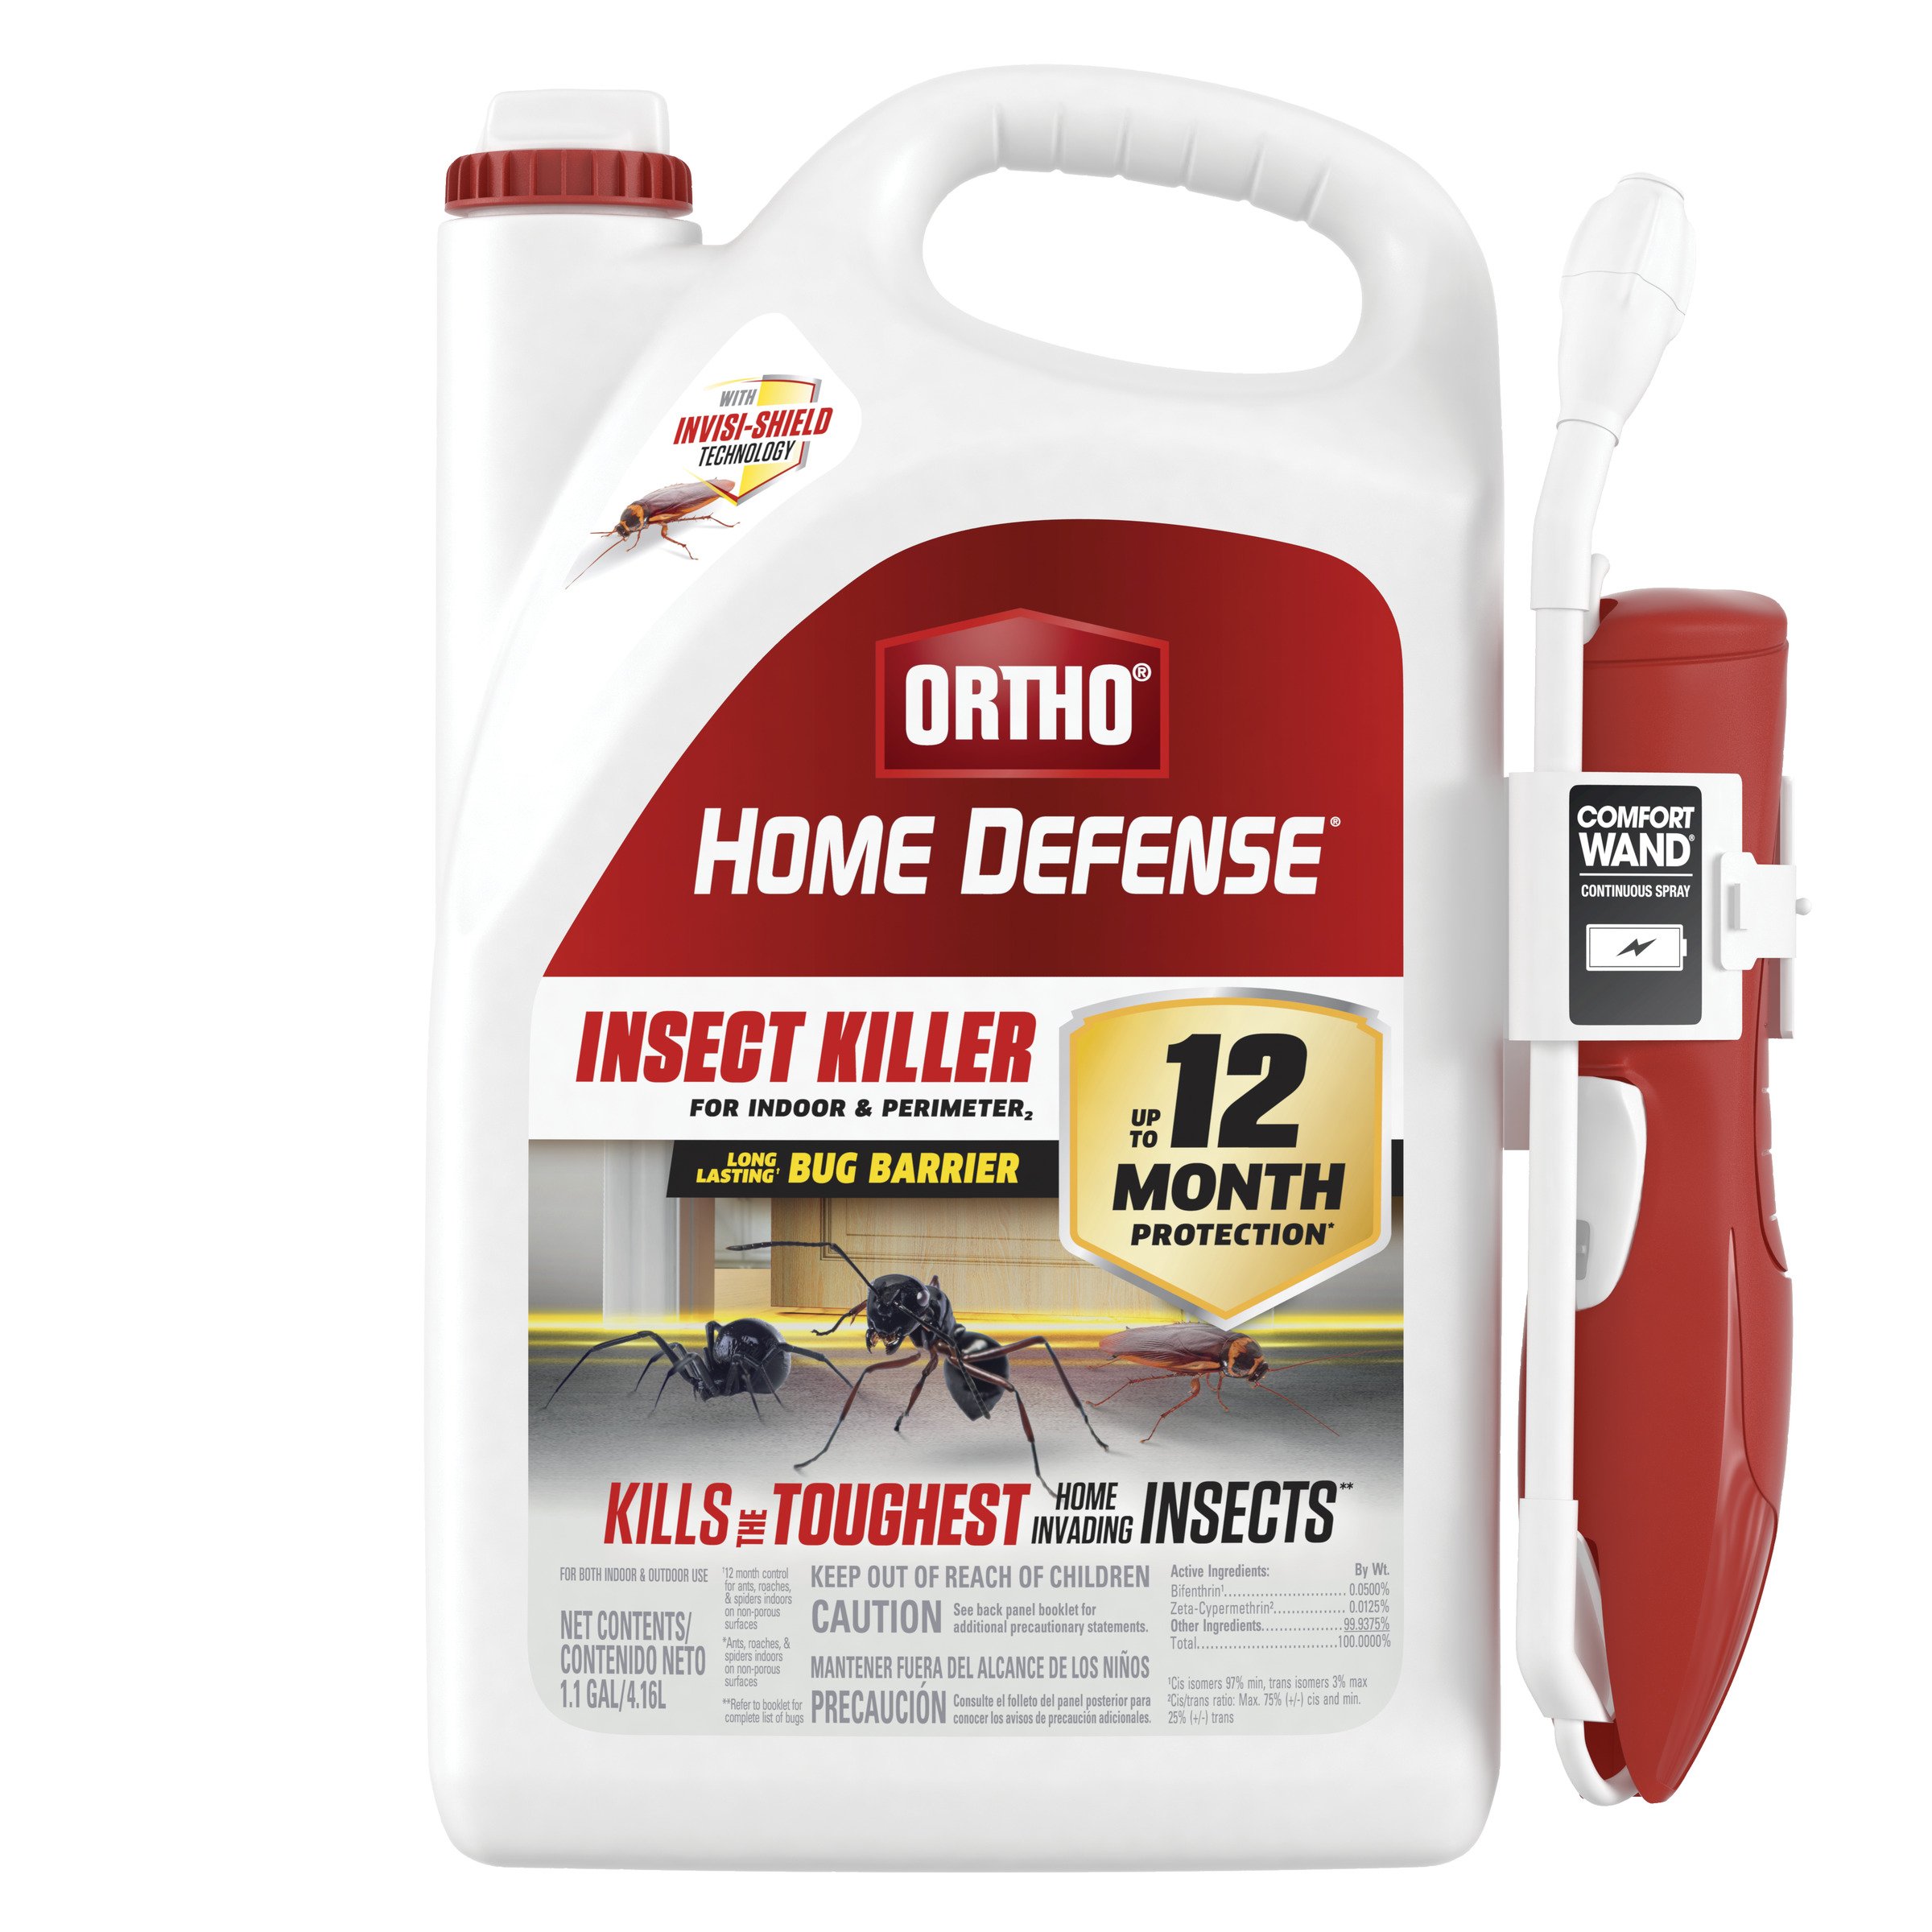 Ortho Home Defense Insect Killer for Indoor & Perimeter2 with Comfort Wand, Kill Ants, Spiders & Roaches, 1.1 gal.